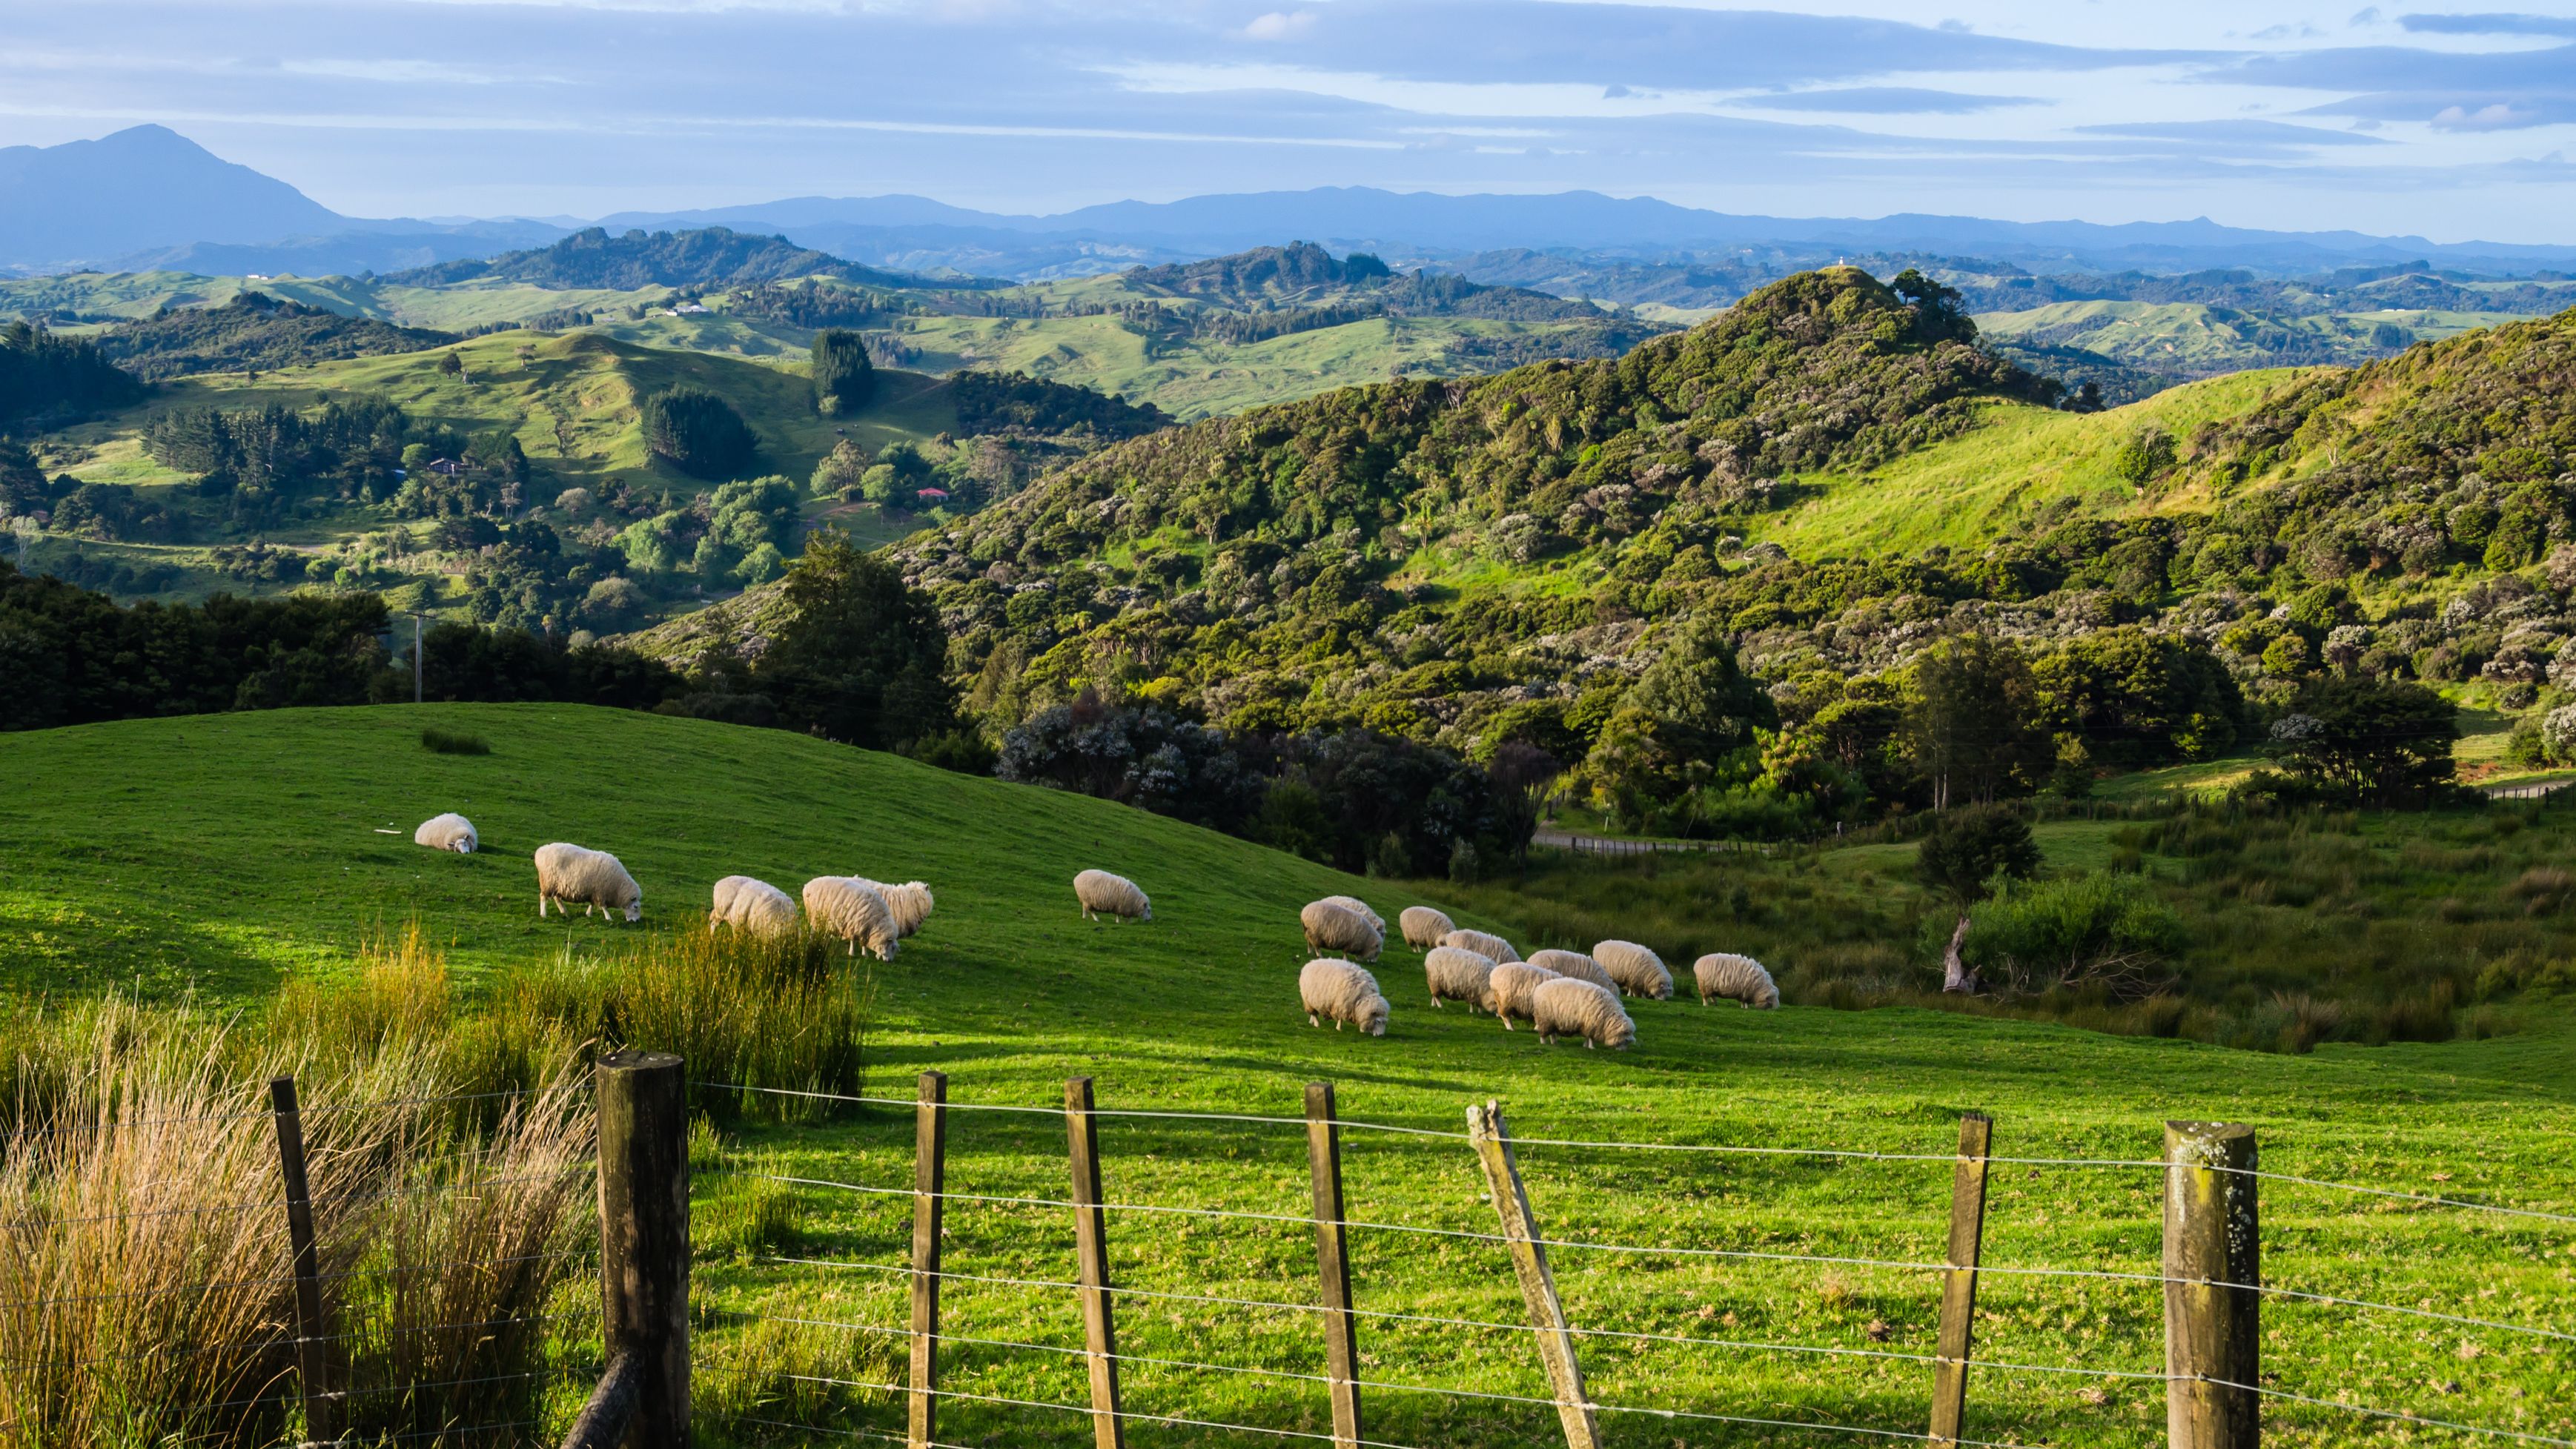 Looking over the lush green hilly landscape in New Zealand, grazing sheep in the foreground